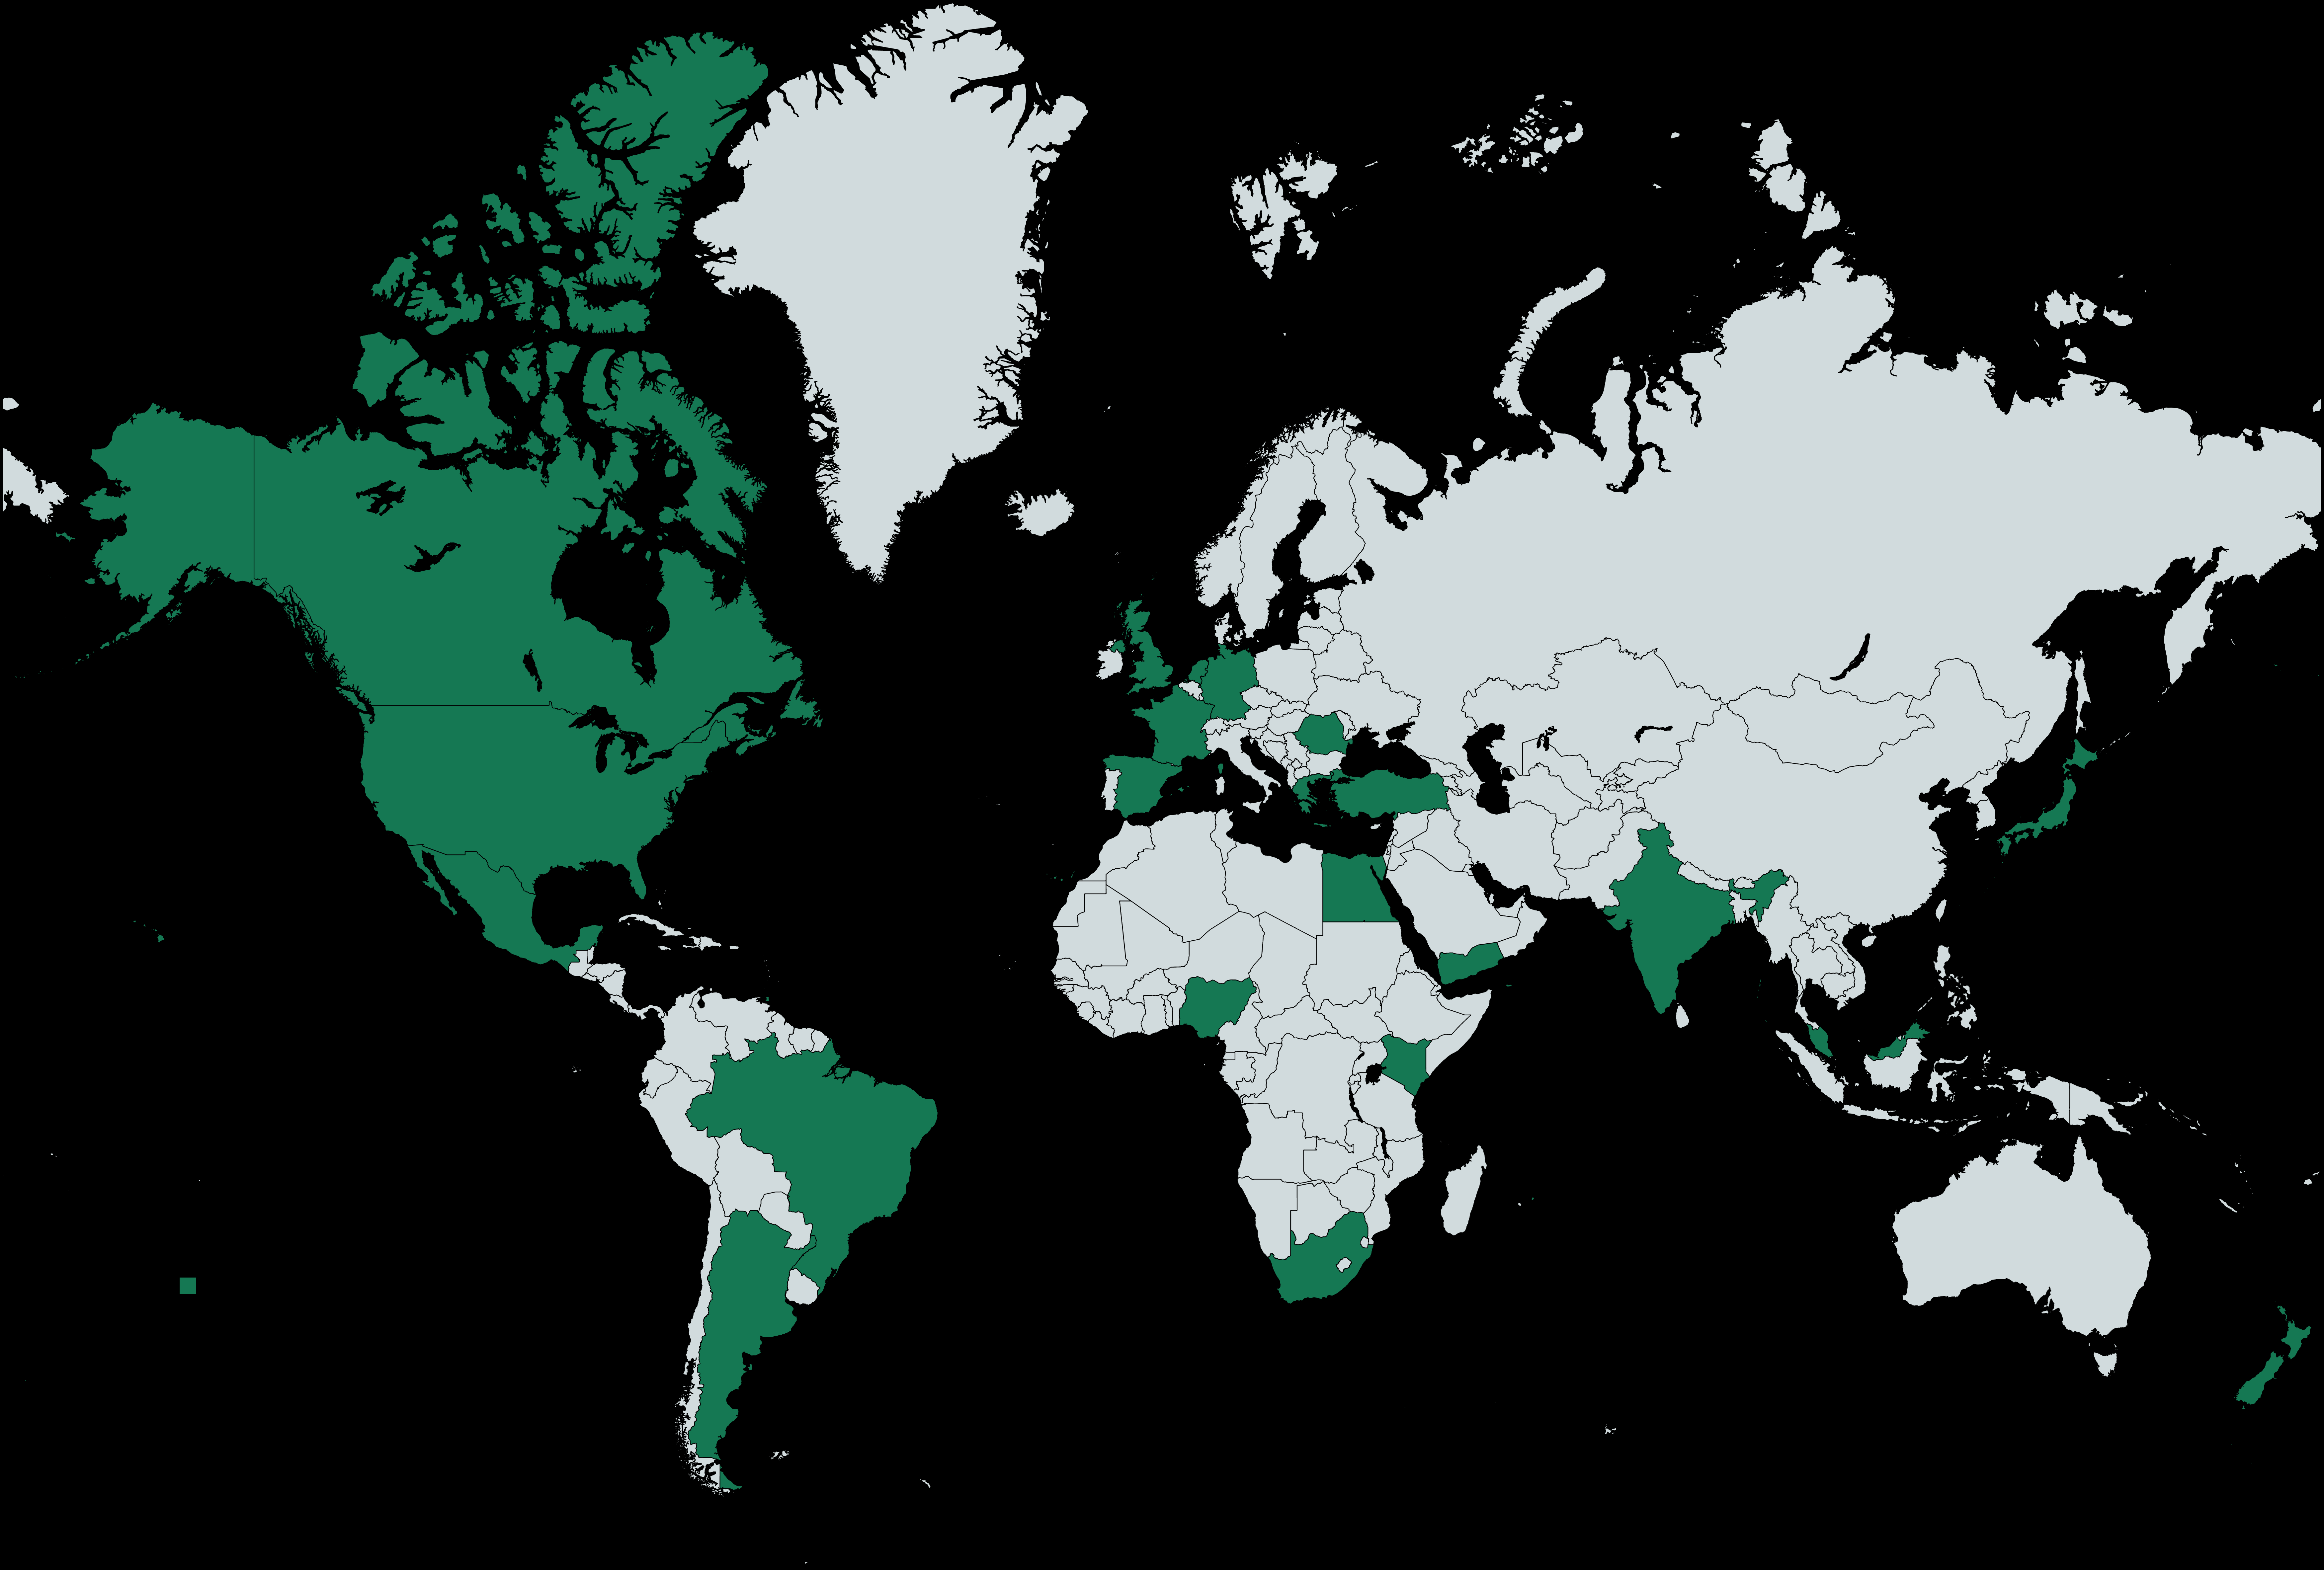 A map of the world (Mercator projection) with 26 countries filled in with green to represent participants in this training